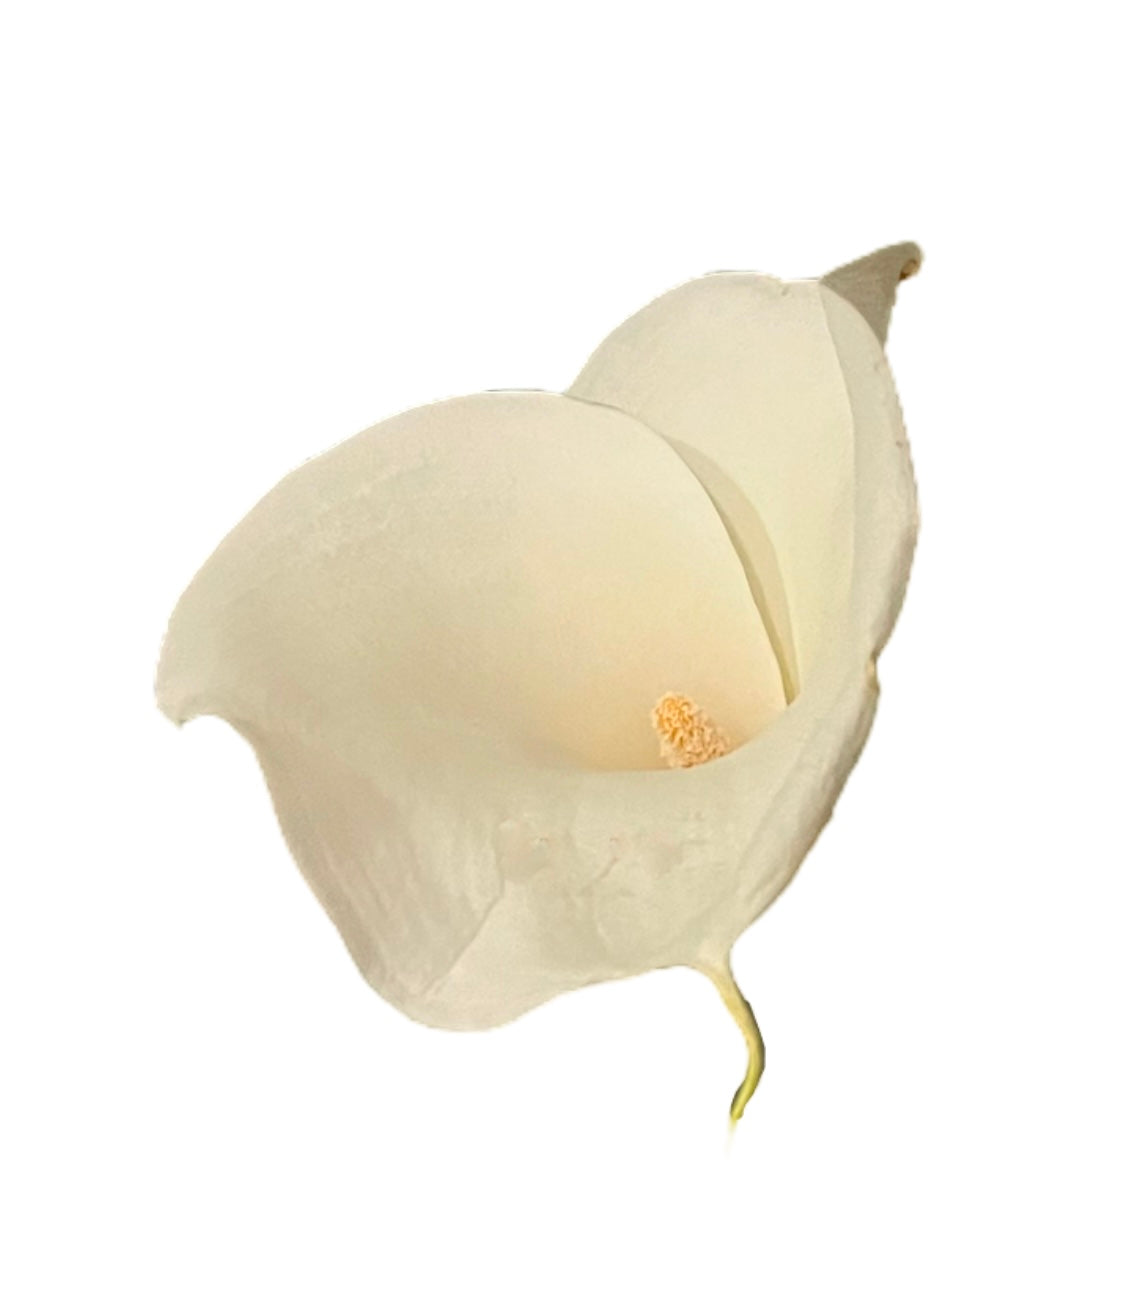 A white Lily flower blooms